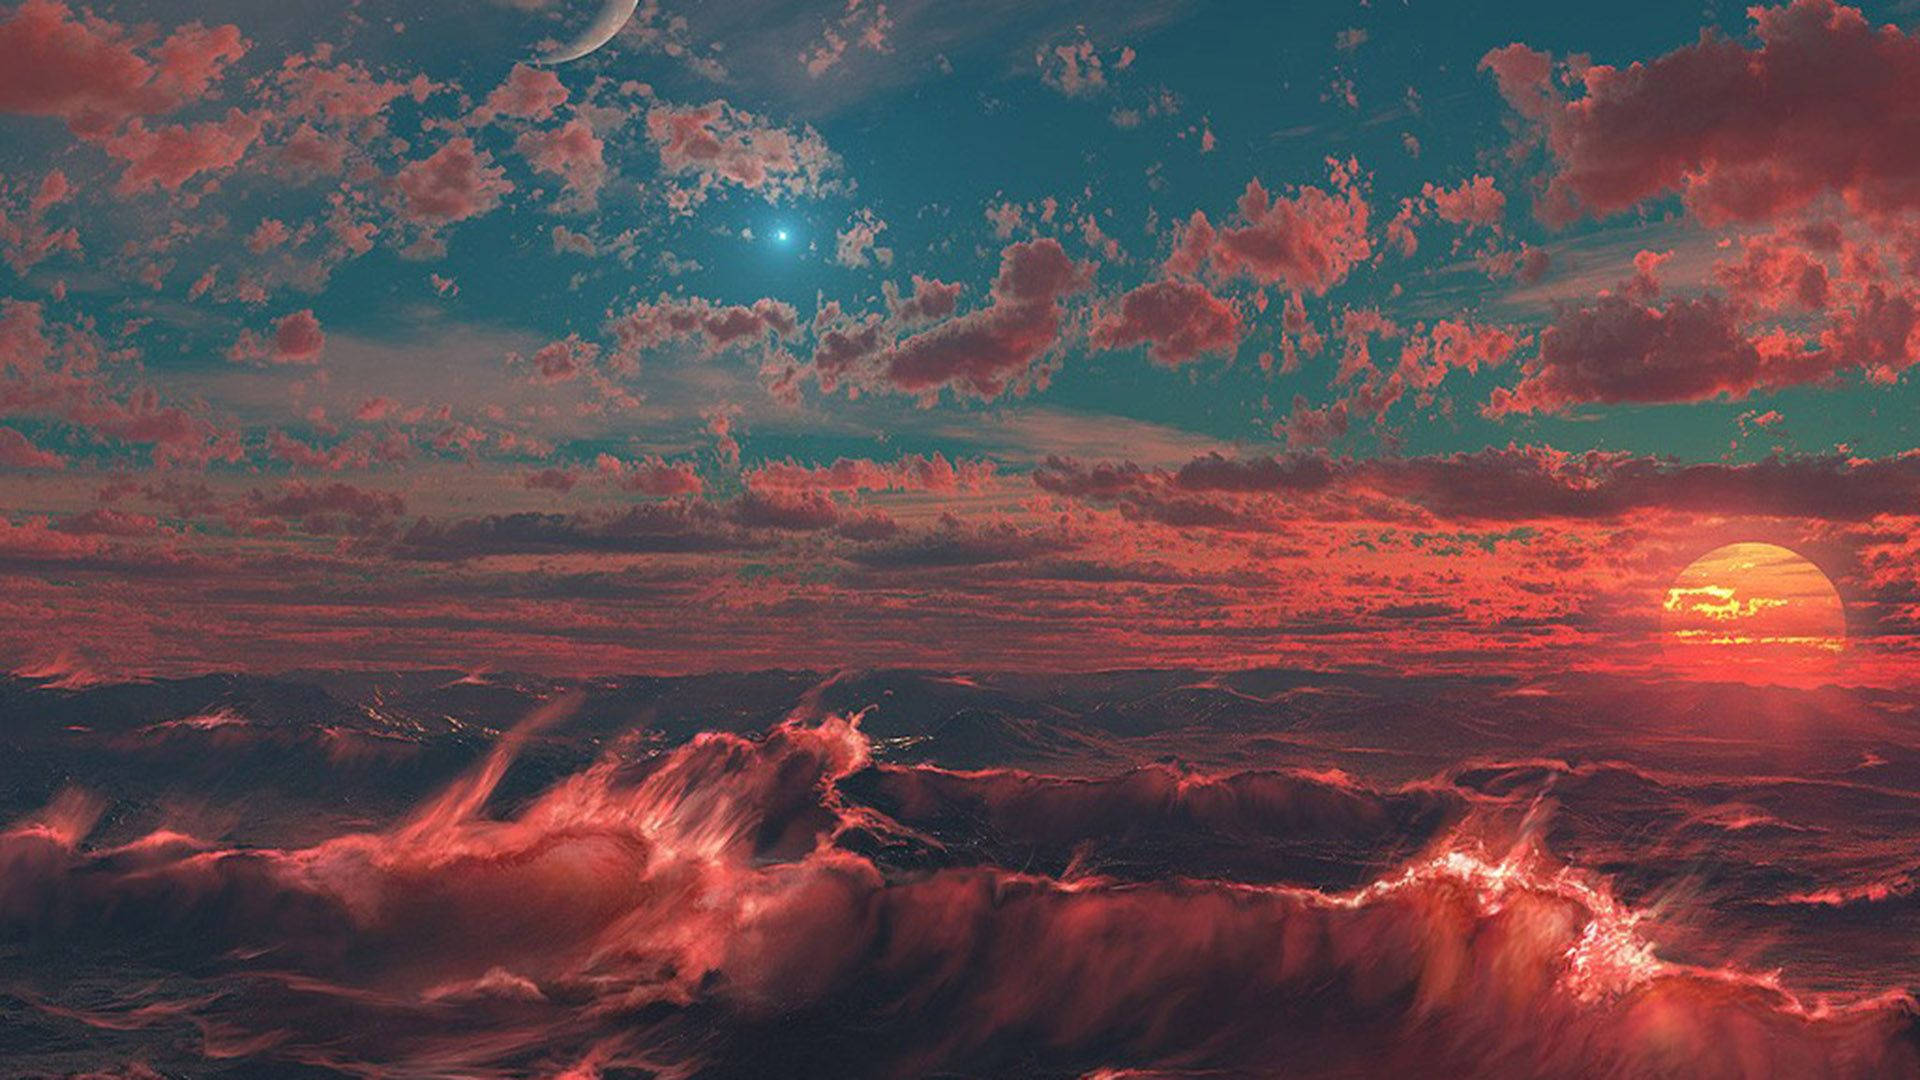 Sunset art with red waves and clouds merging with a blue star.